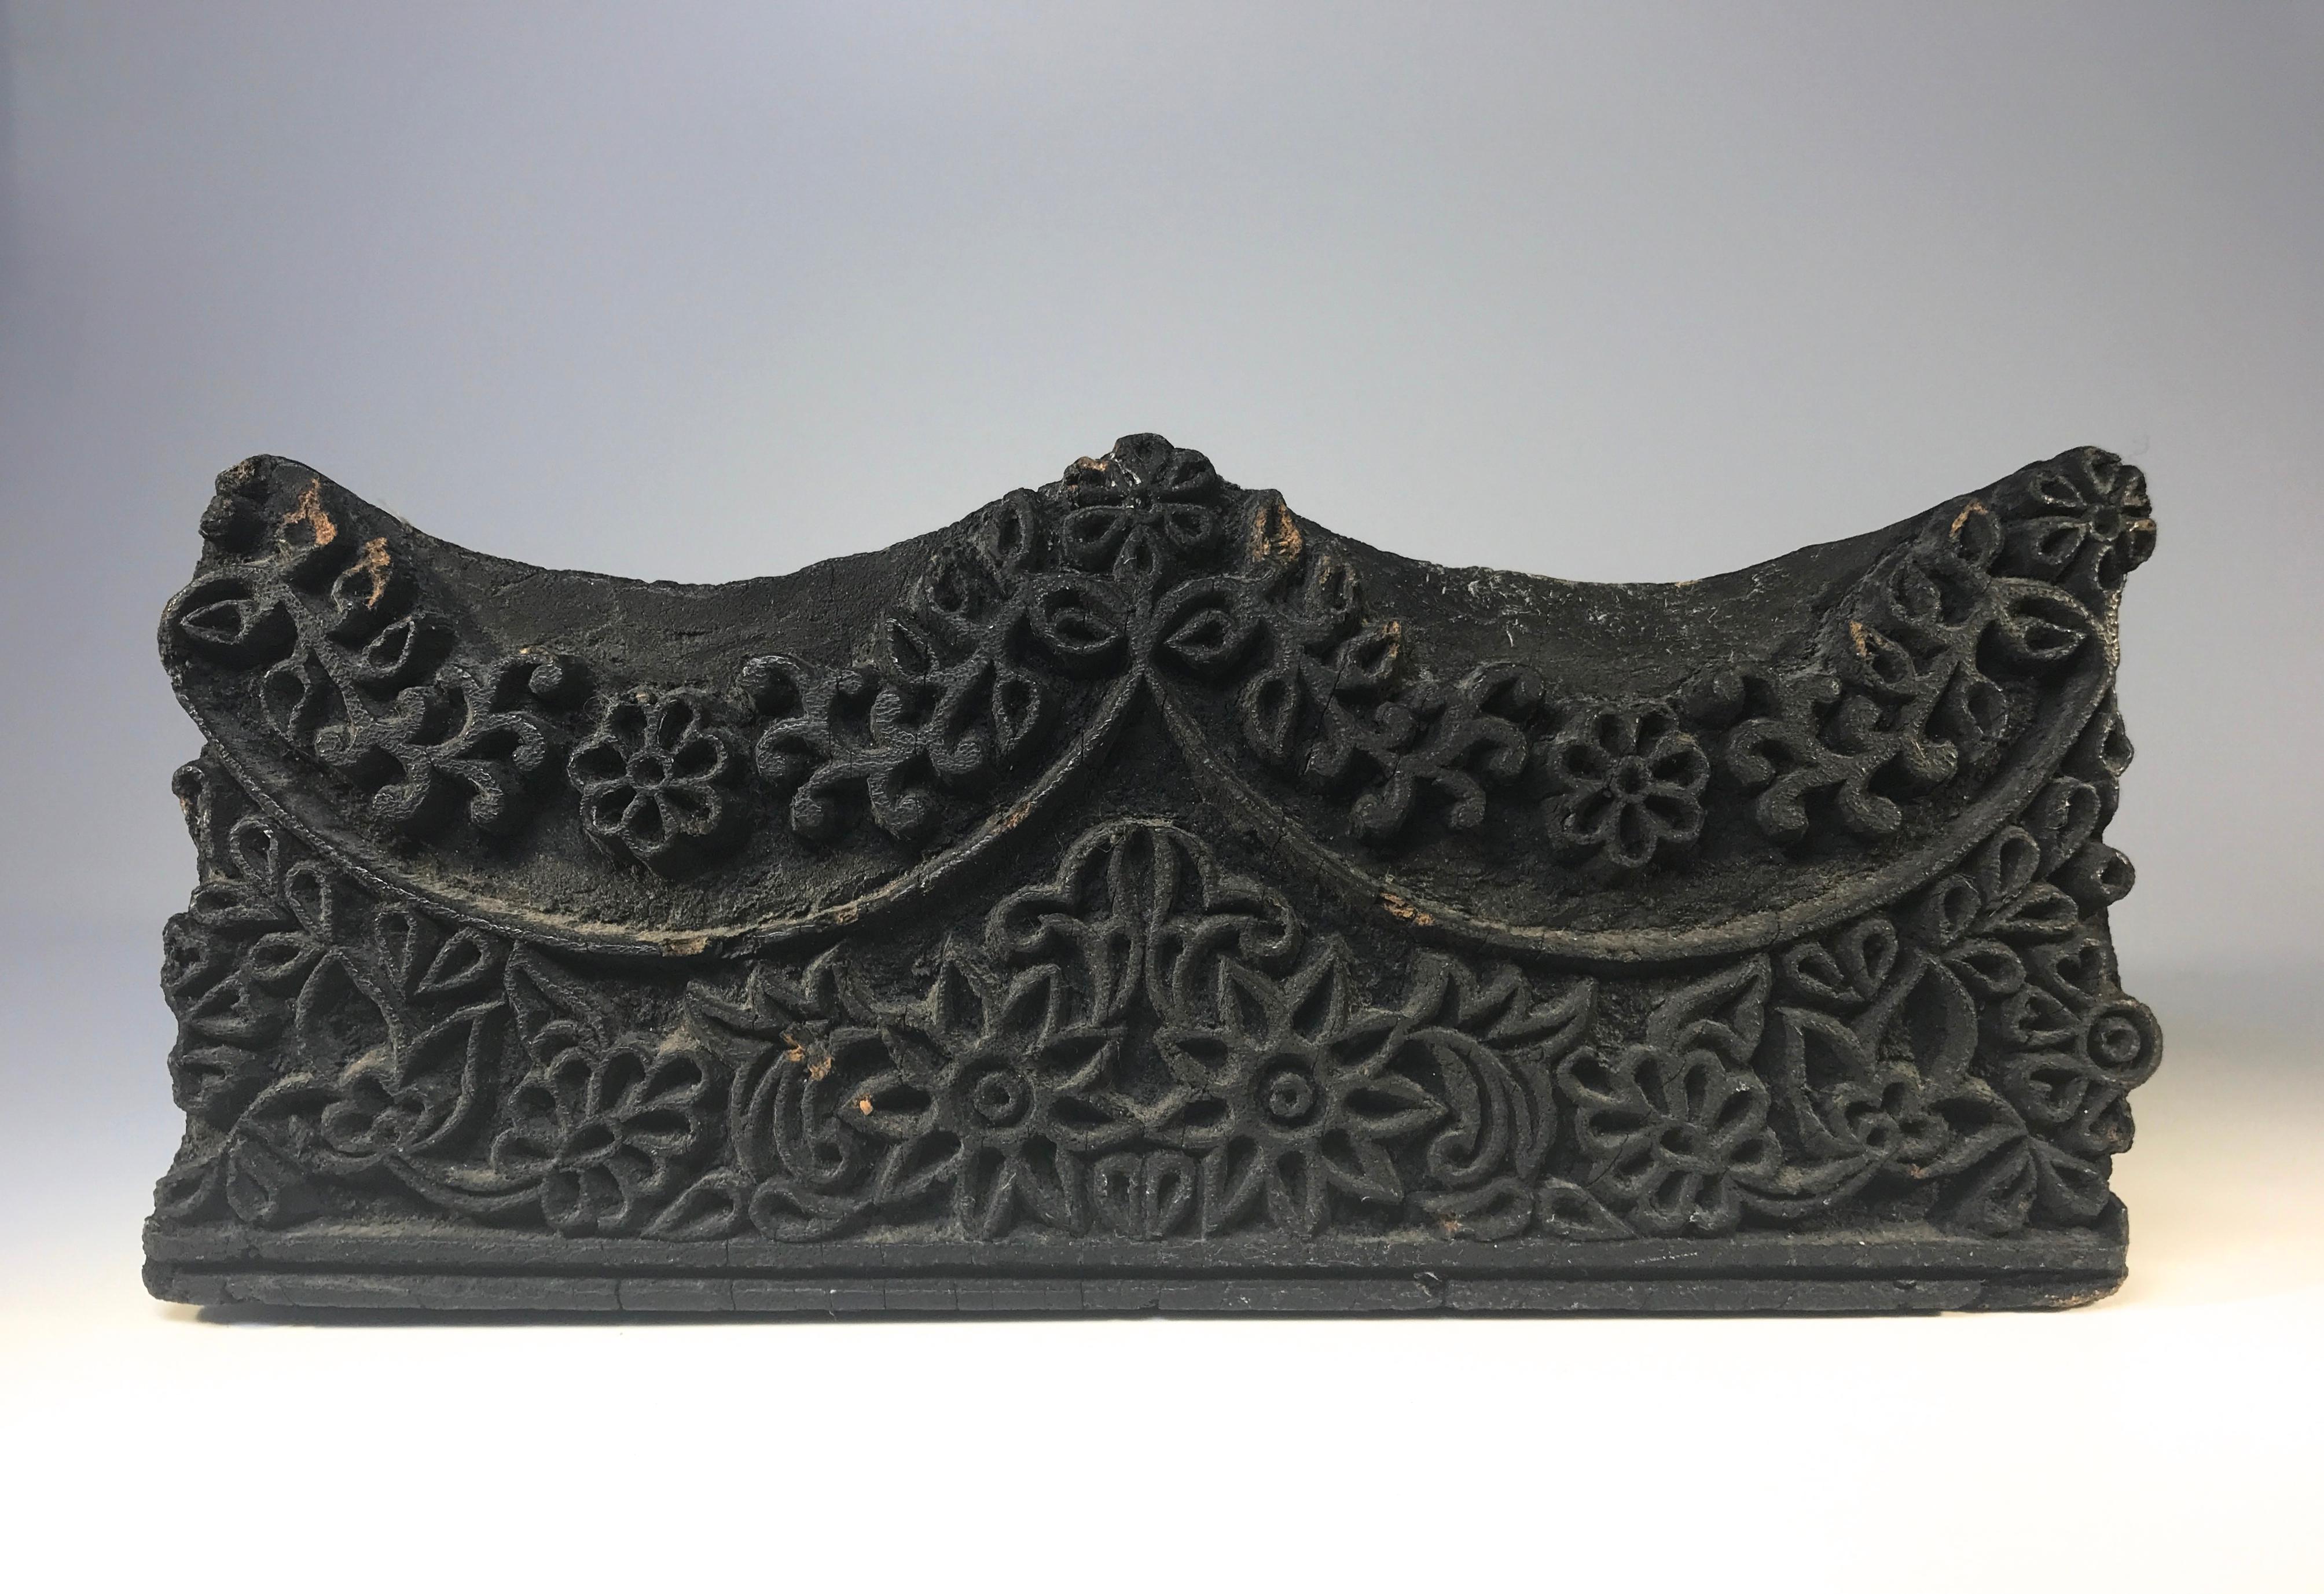 Splendidly intricately hand carved large wooden heavyweight printing block from Asia
Traditionally used for hand held block printing ink or dye to textiles and paper
Fully functional or purely decorative
Circa 1970s
Height 3.5 inch, Width 7.75